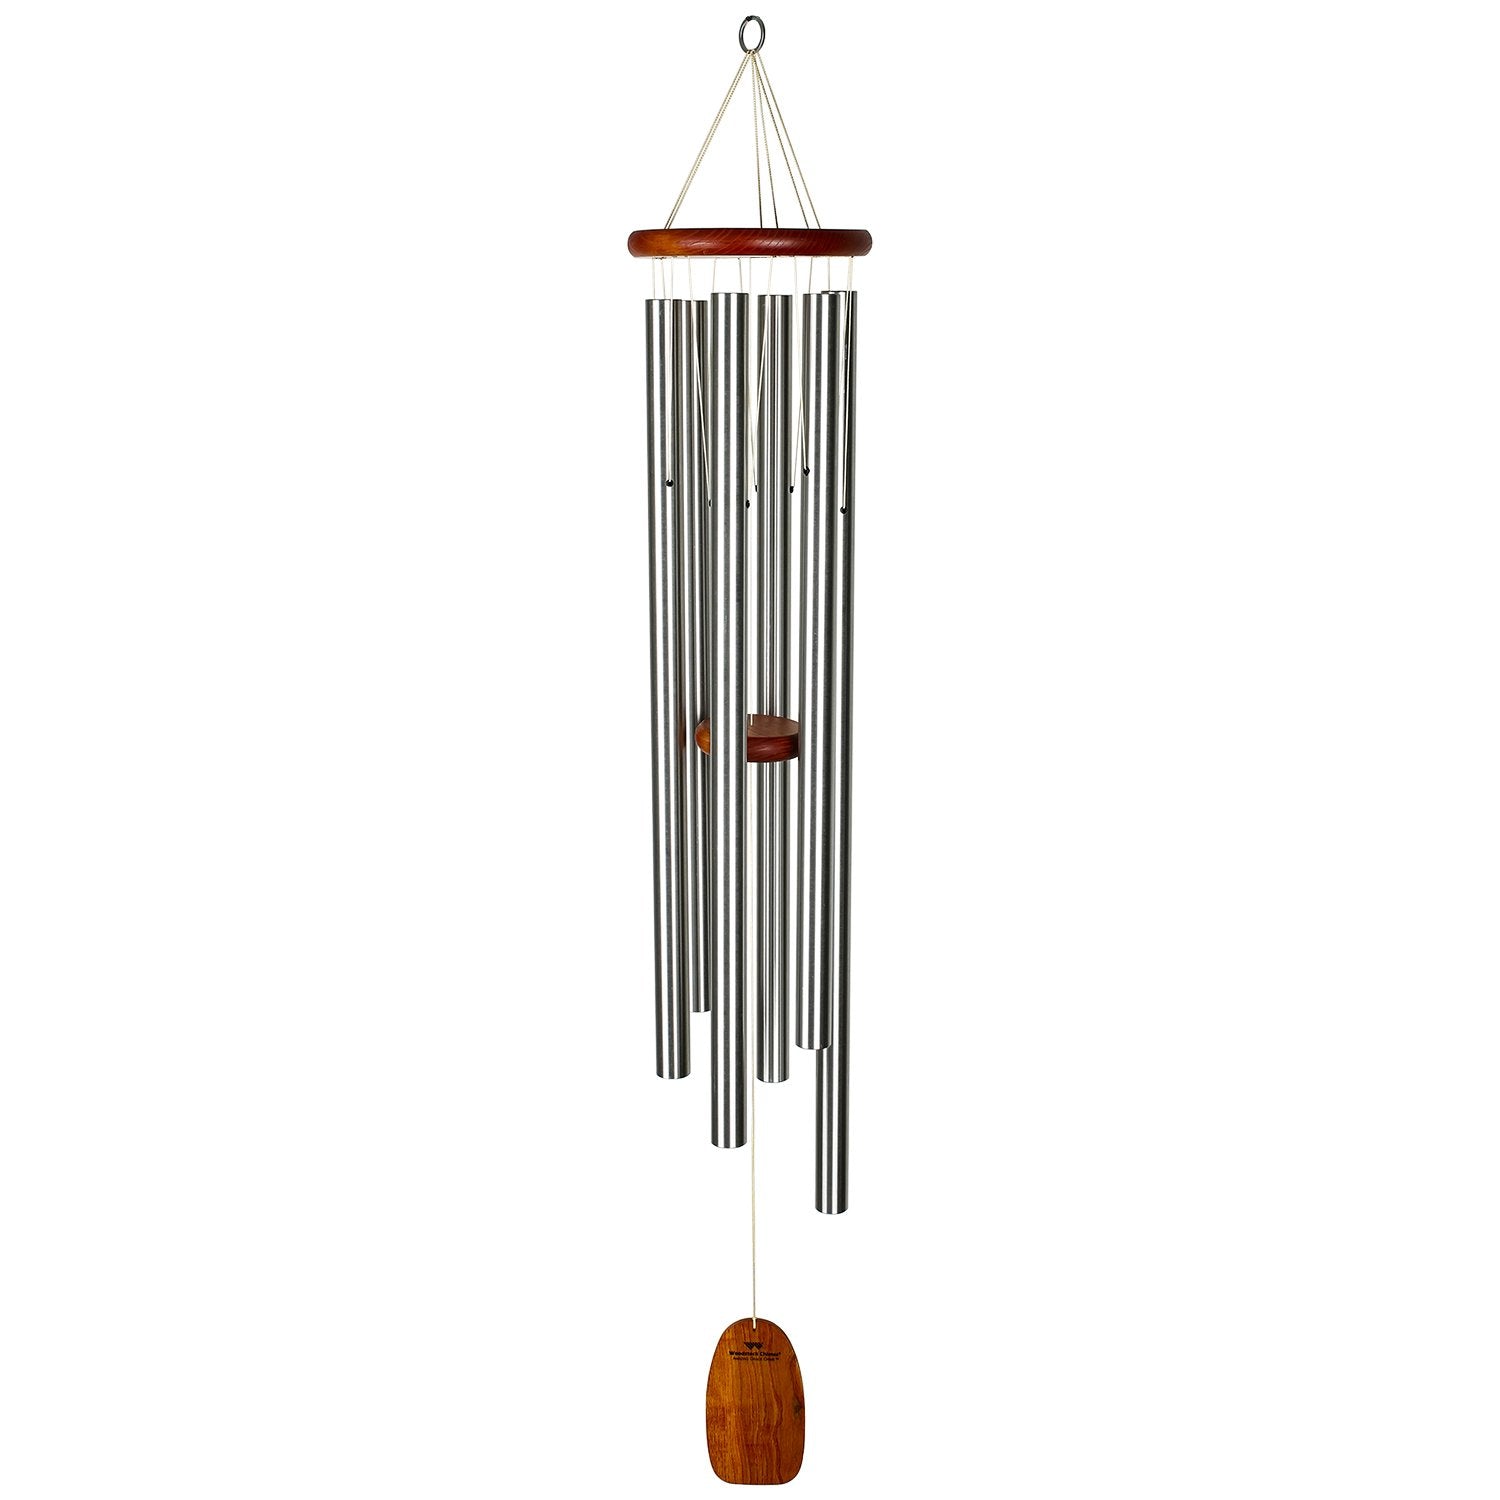 Amazing Grace Chime Heavenly by Woodstock Chimes